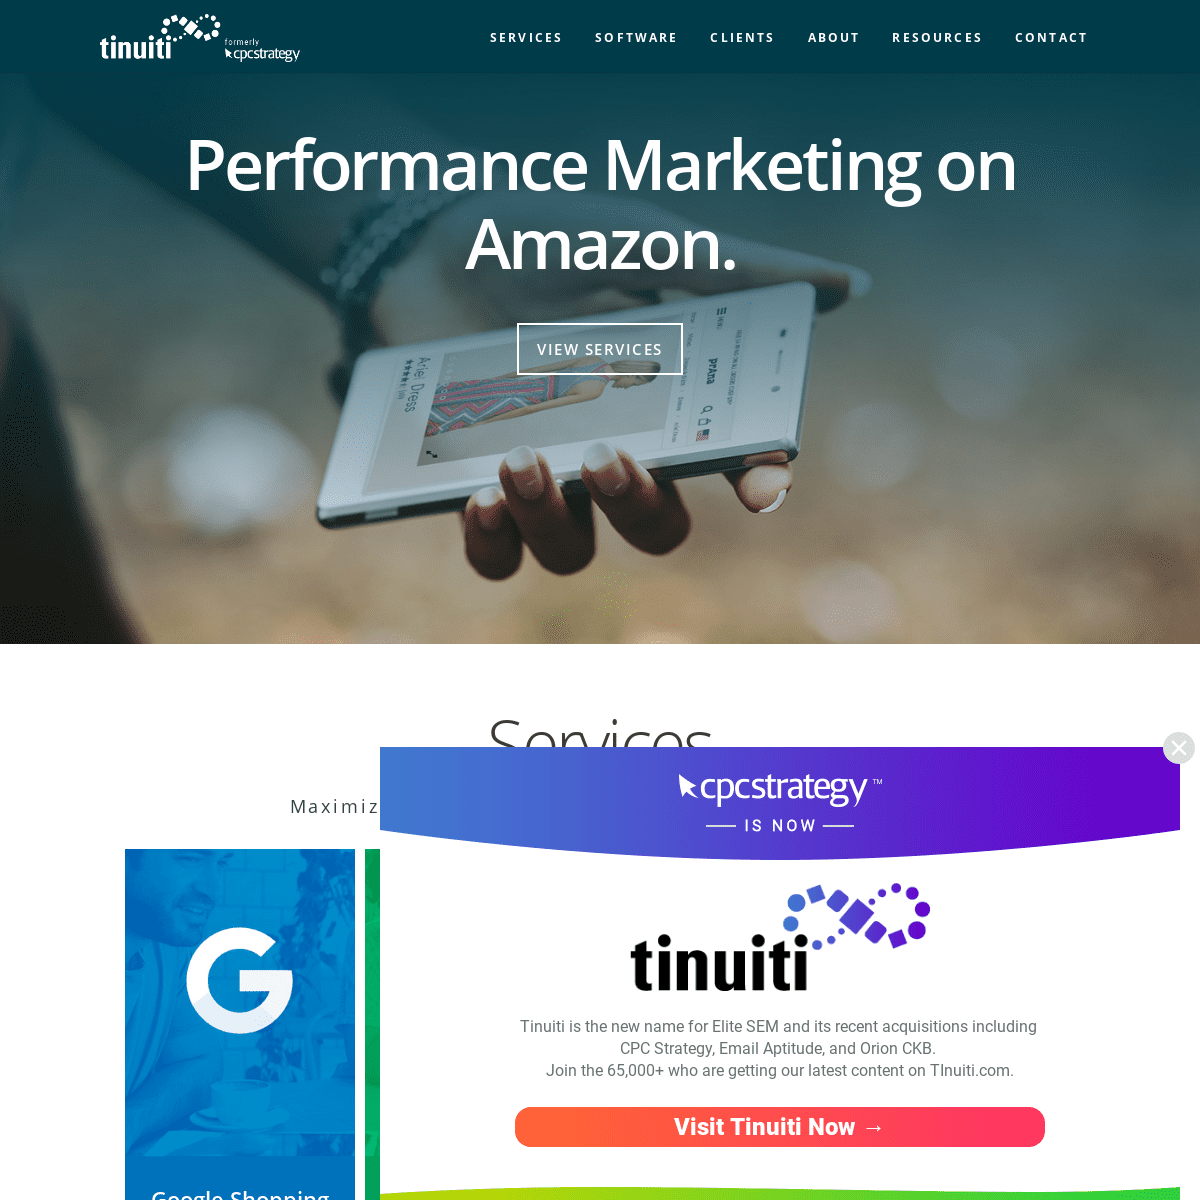 Performance Marketing Agency Specializing in Driving Growth Across Amazon, Google, and Social - CPC Strategy